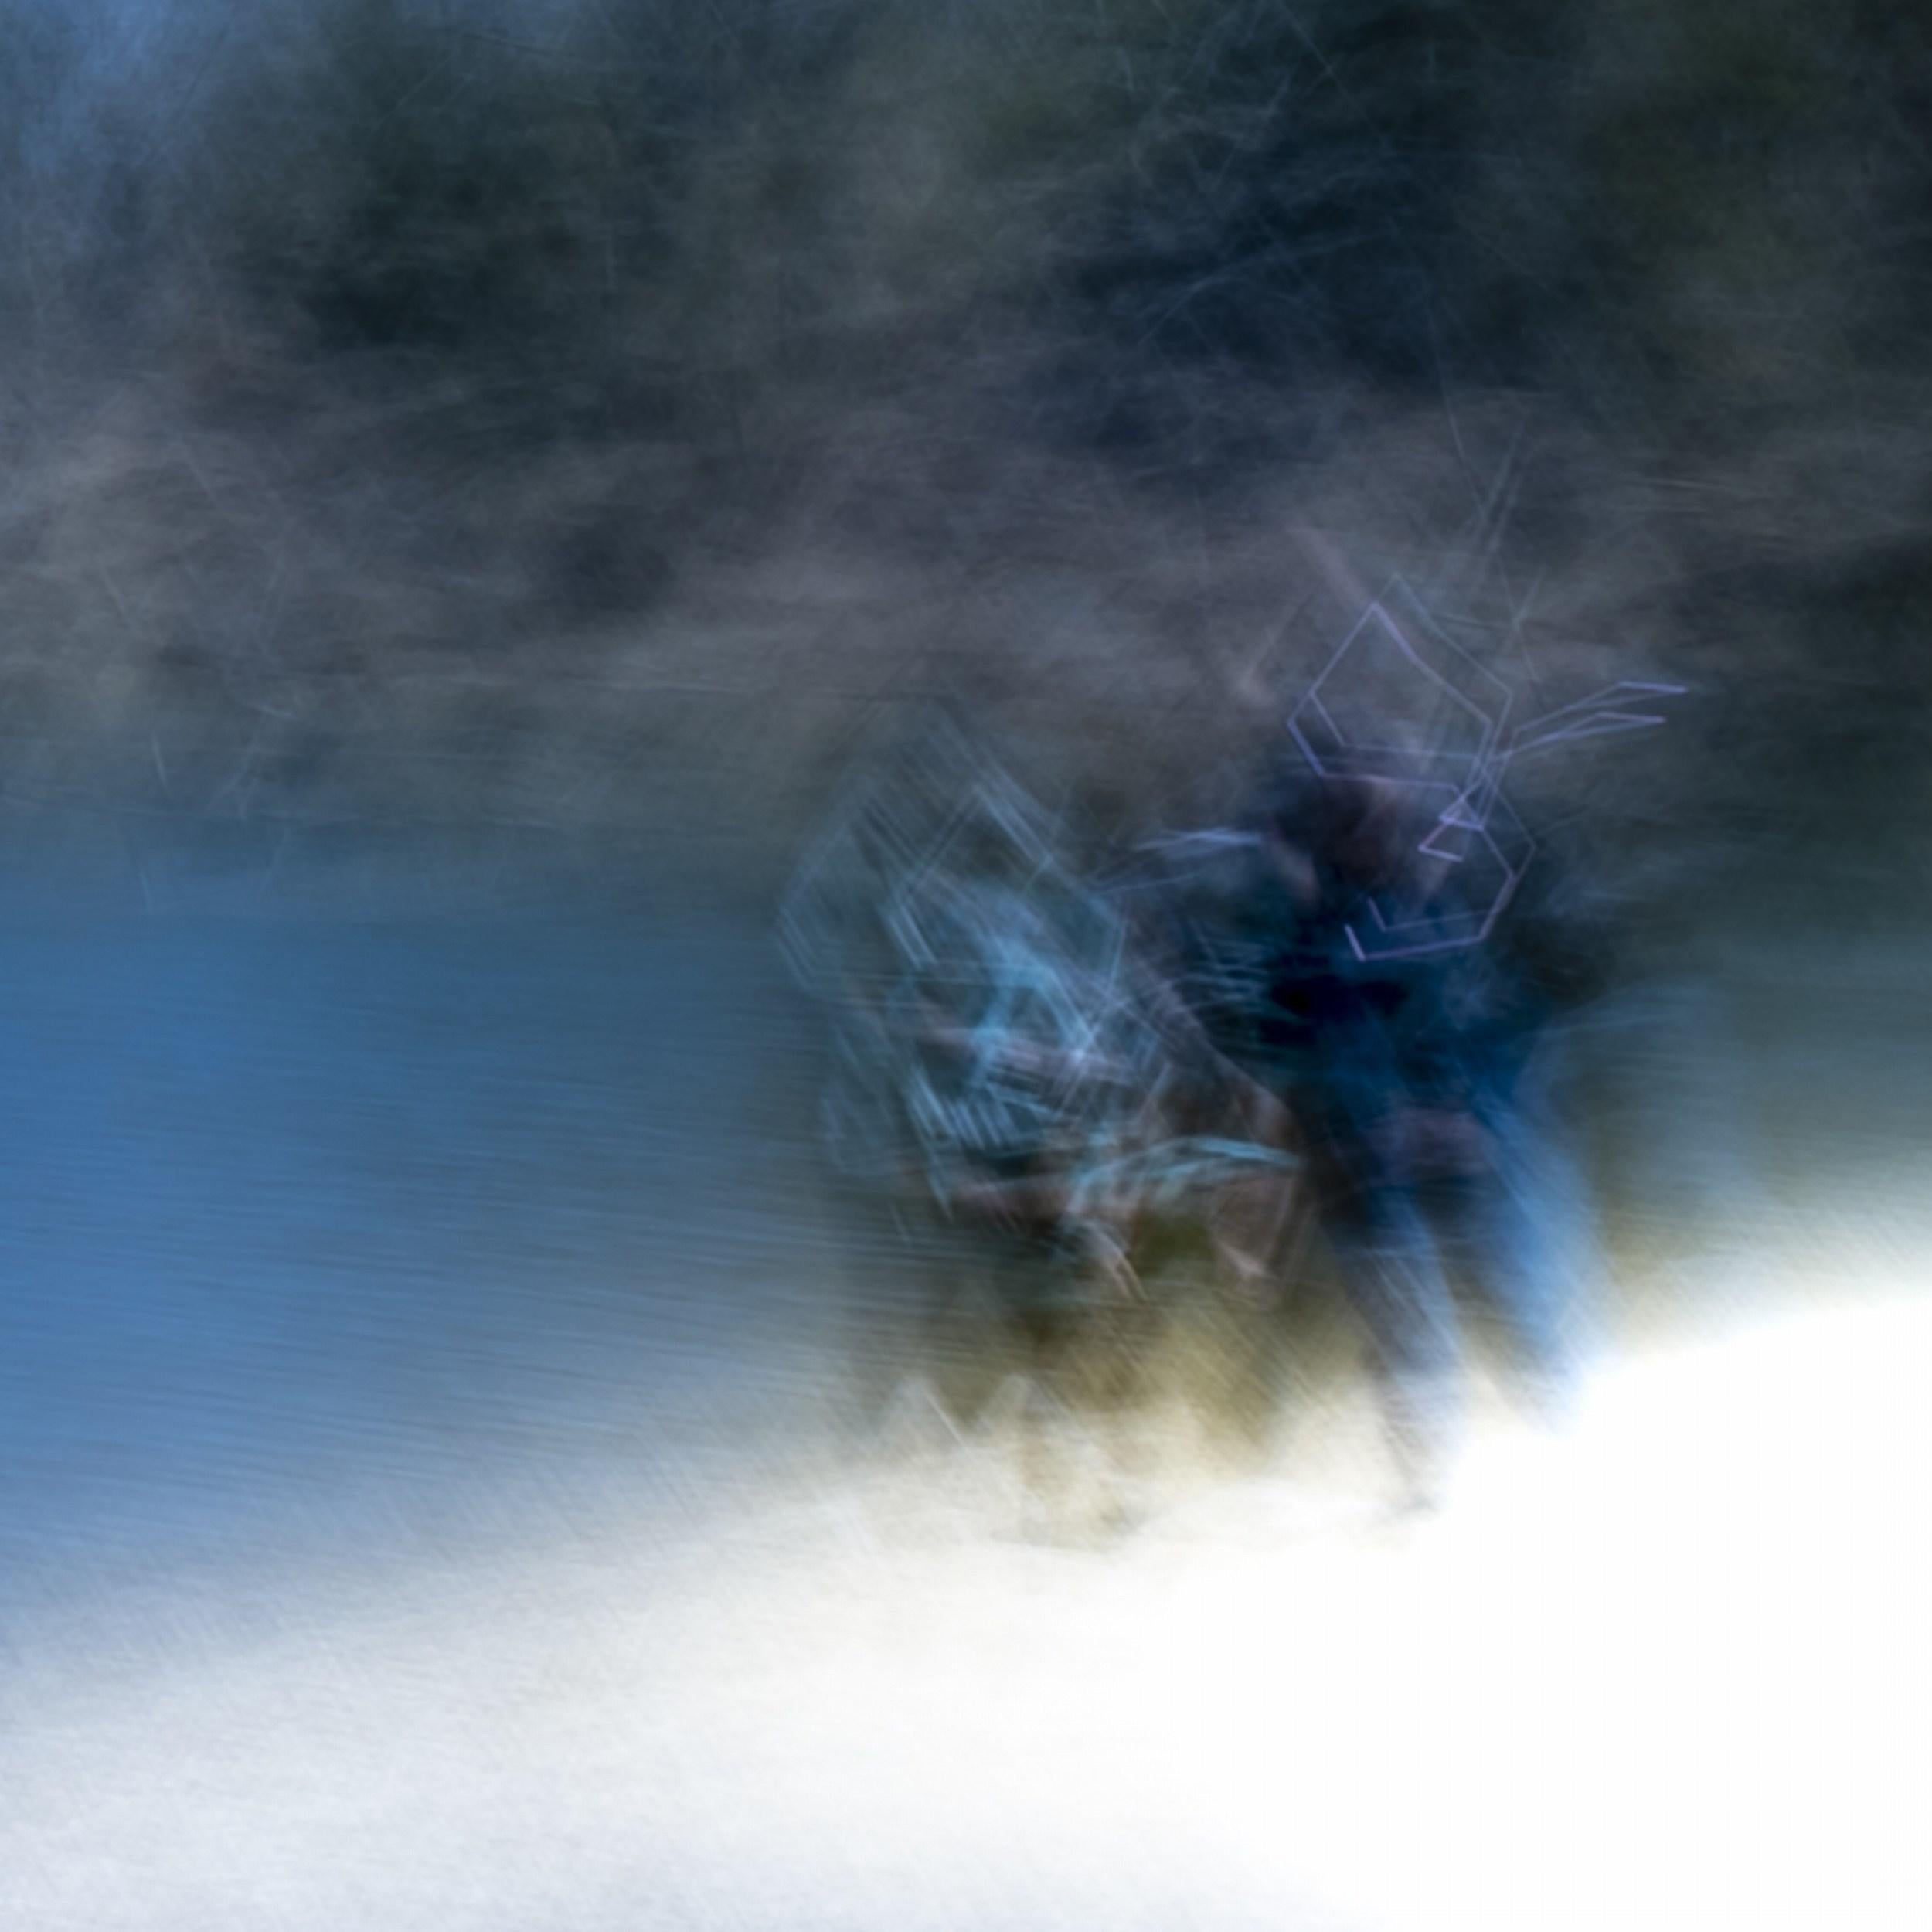 Jeffrey Tamblyn Figurative Photograph - Counsel (outdoor scene, people talking, quiet moment, motion blur, waterfront, )